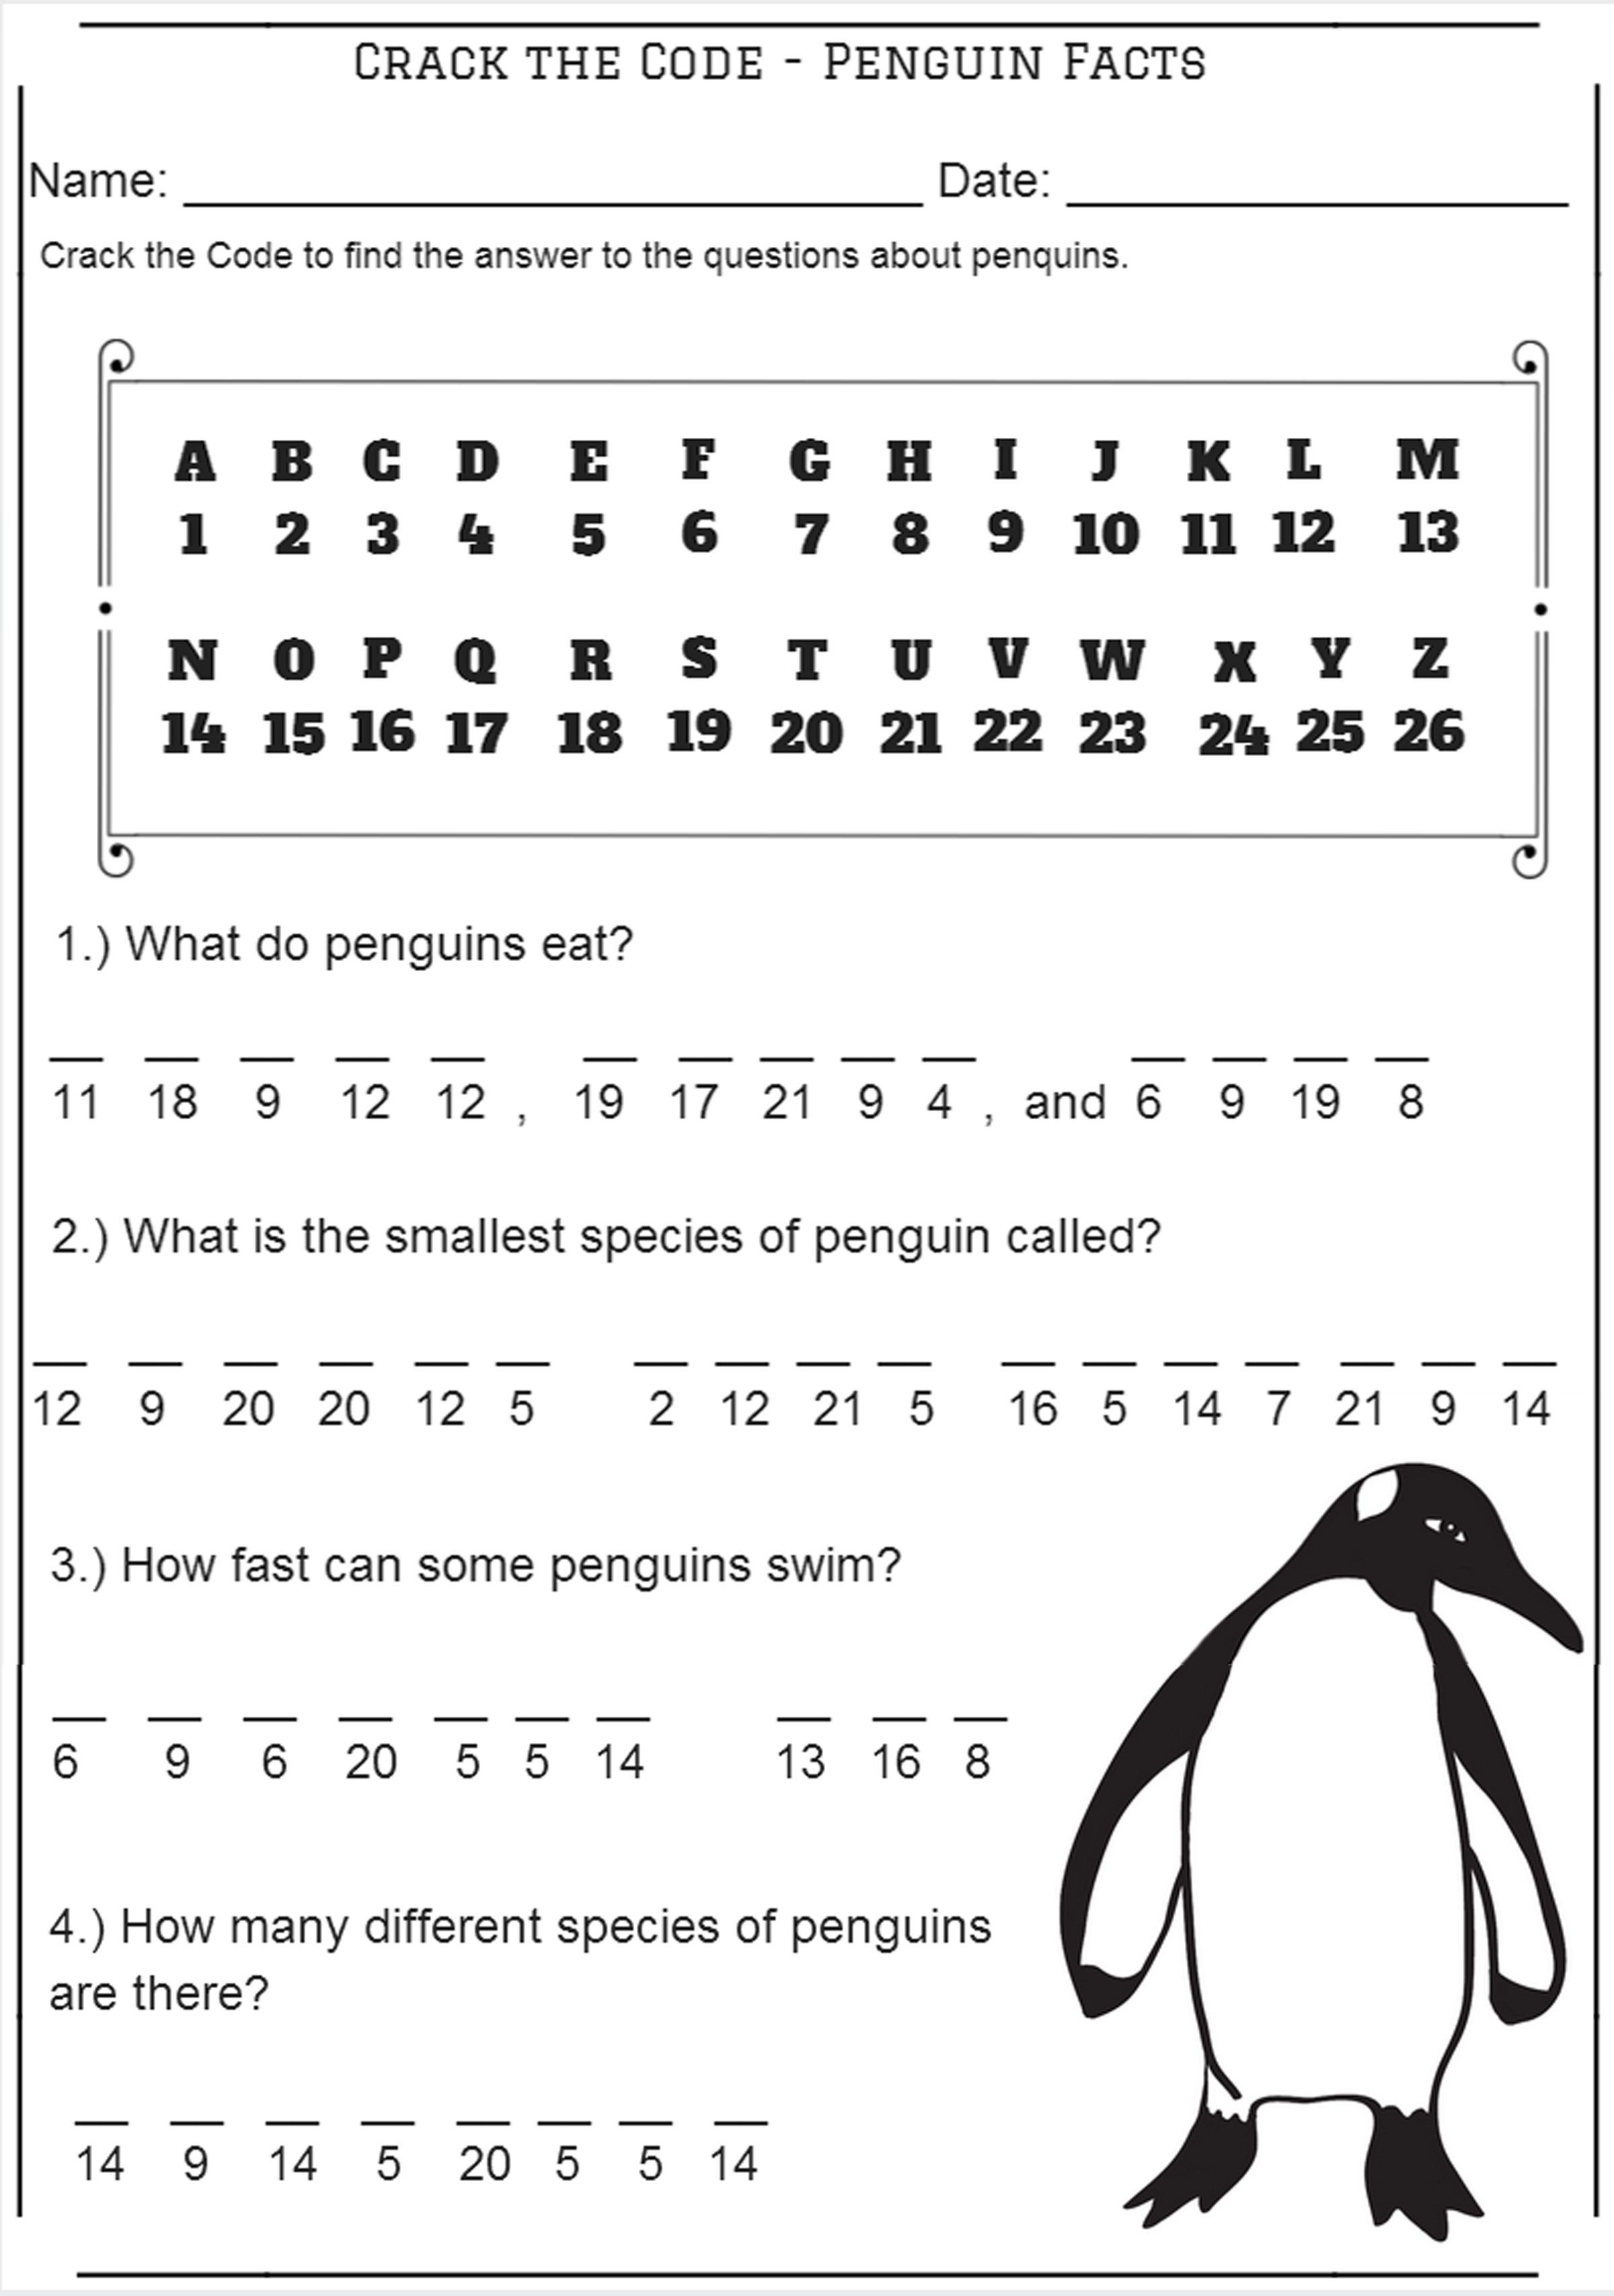 Crack the Code Worksheets Printable Pin On Free Worksheets for Kids